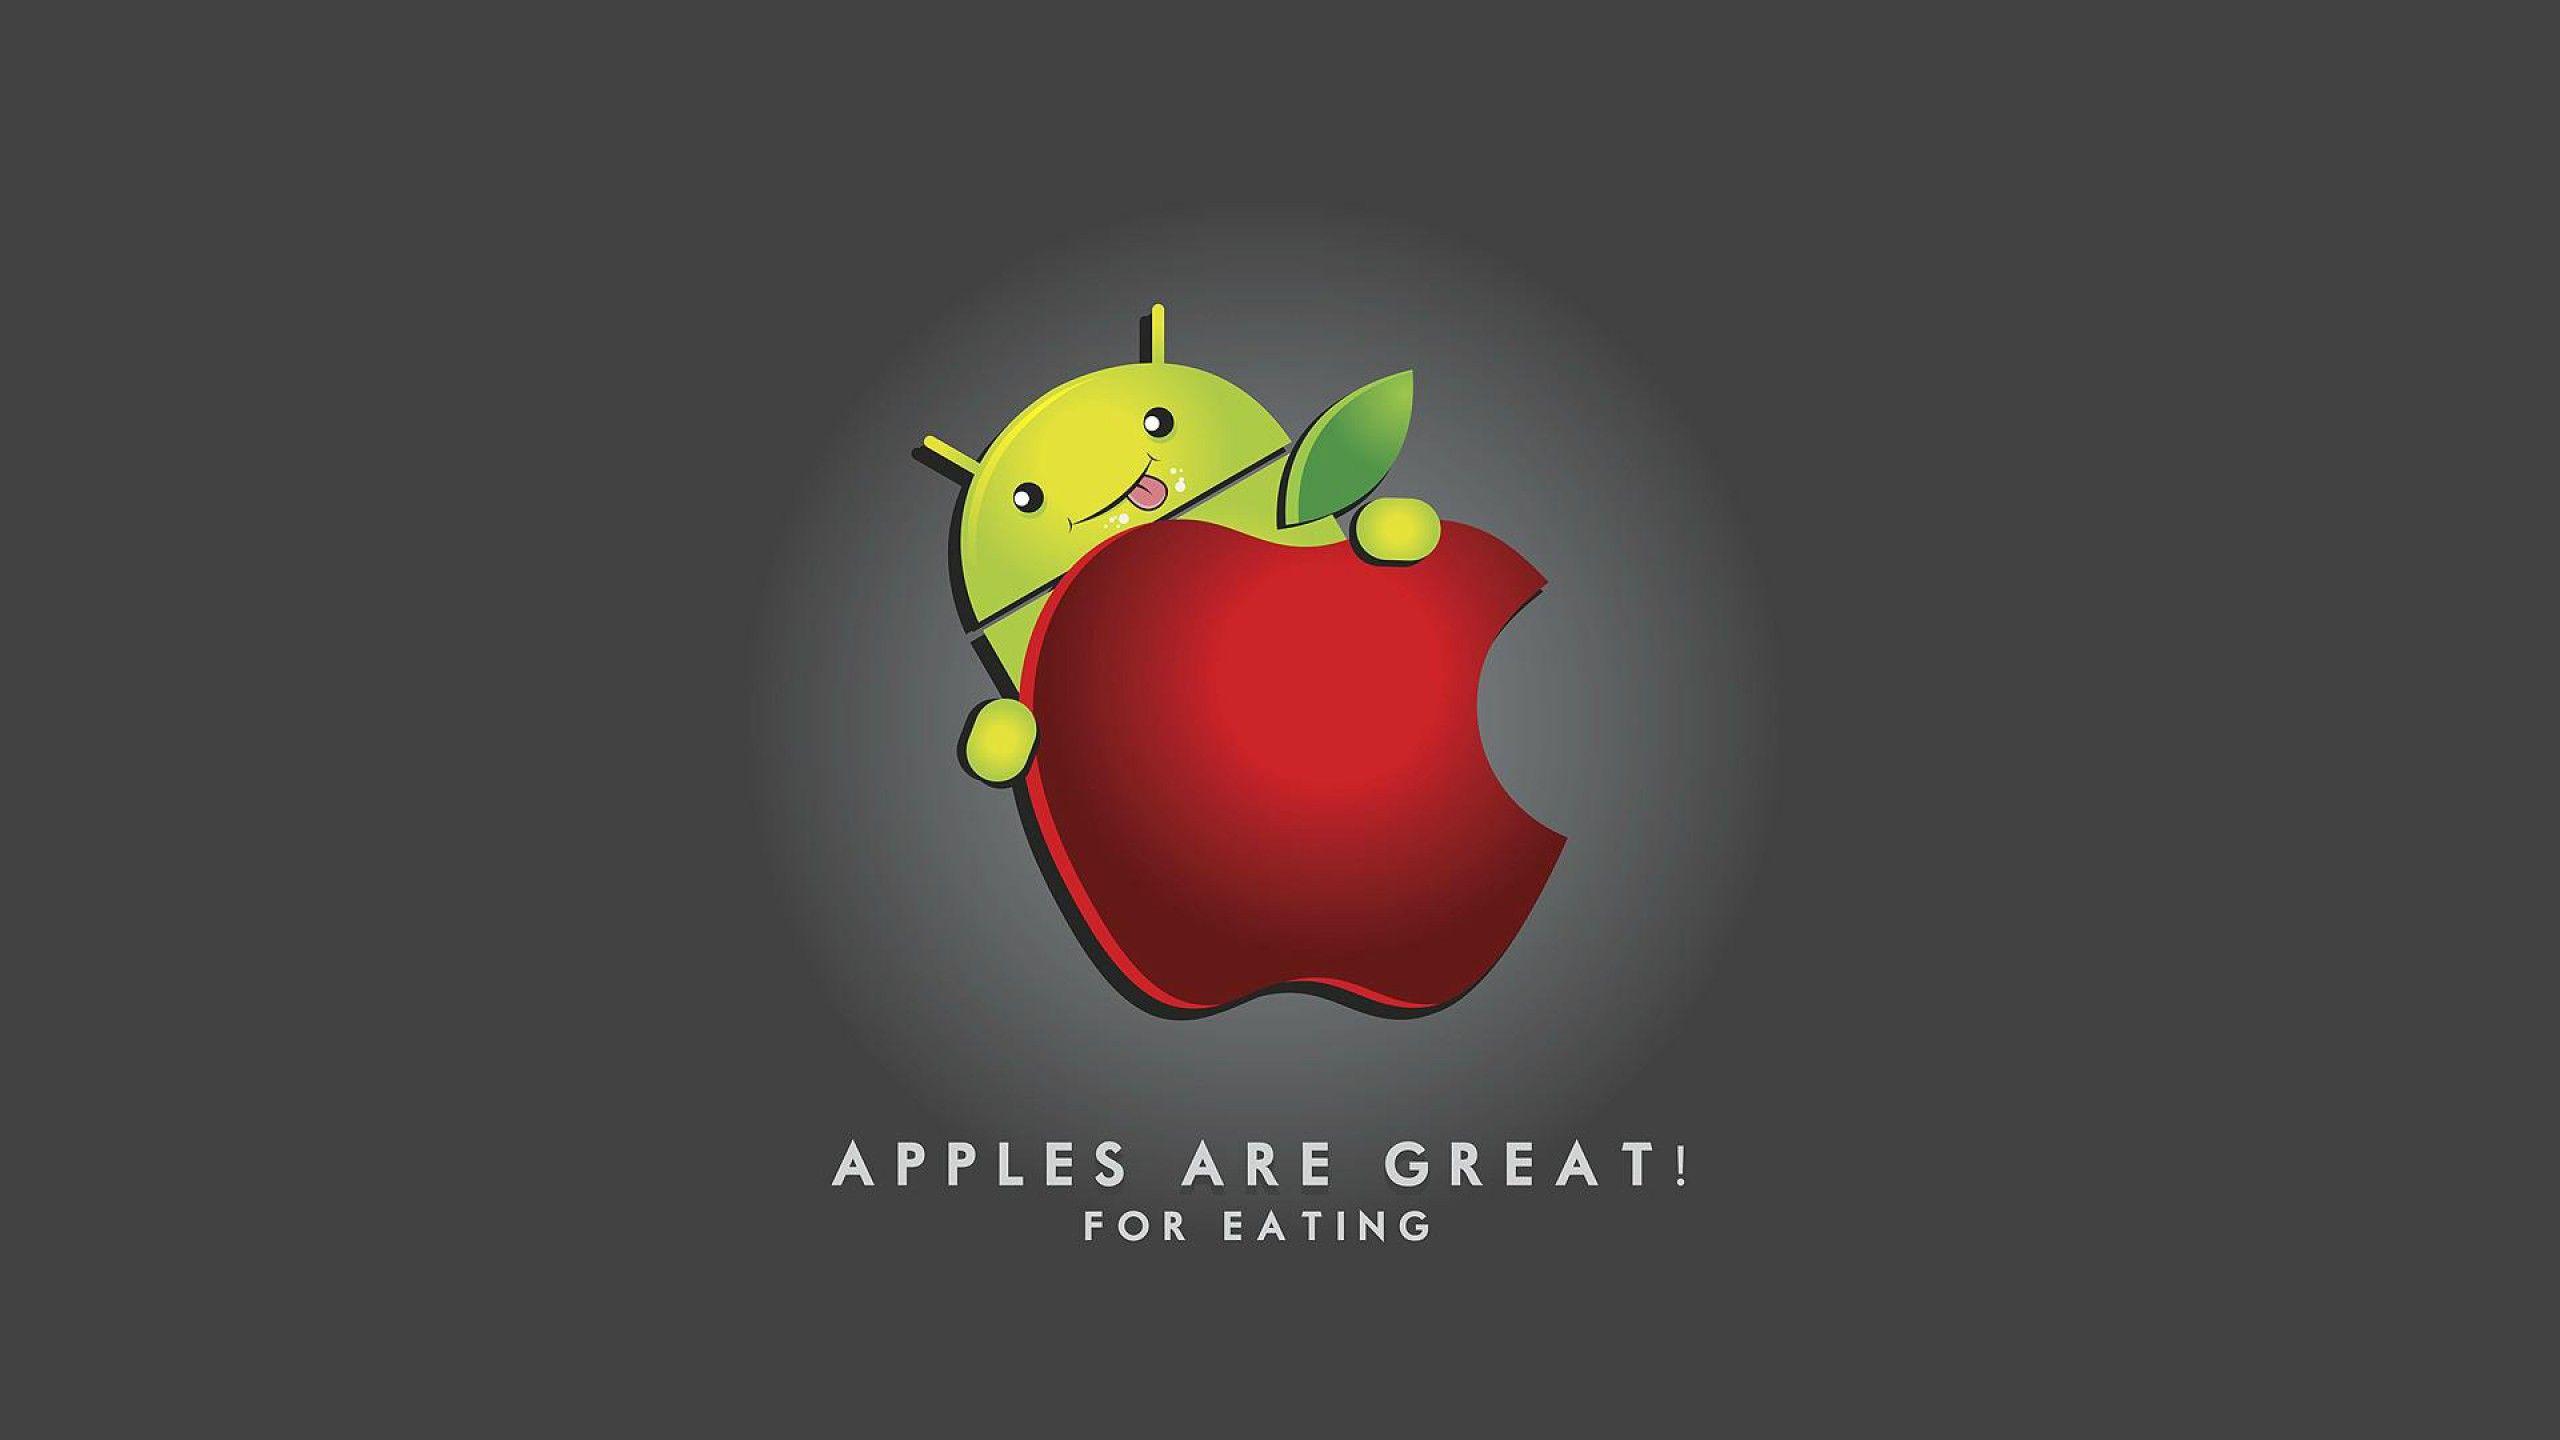 Apples Are Great For Eating Apple vs Android Wallpaper. Cute wallpaper for android, Apple wallpaper, Android wallpaper